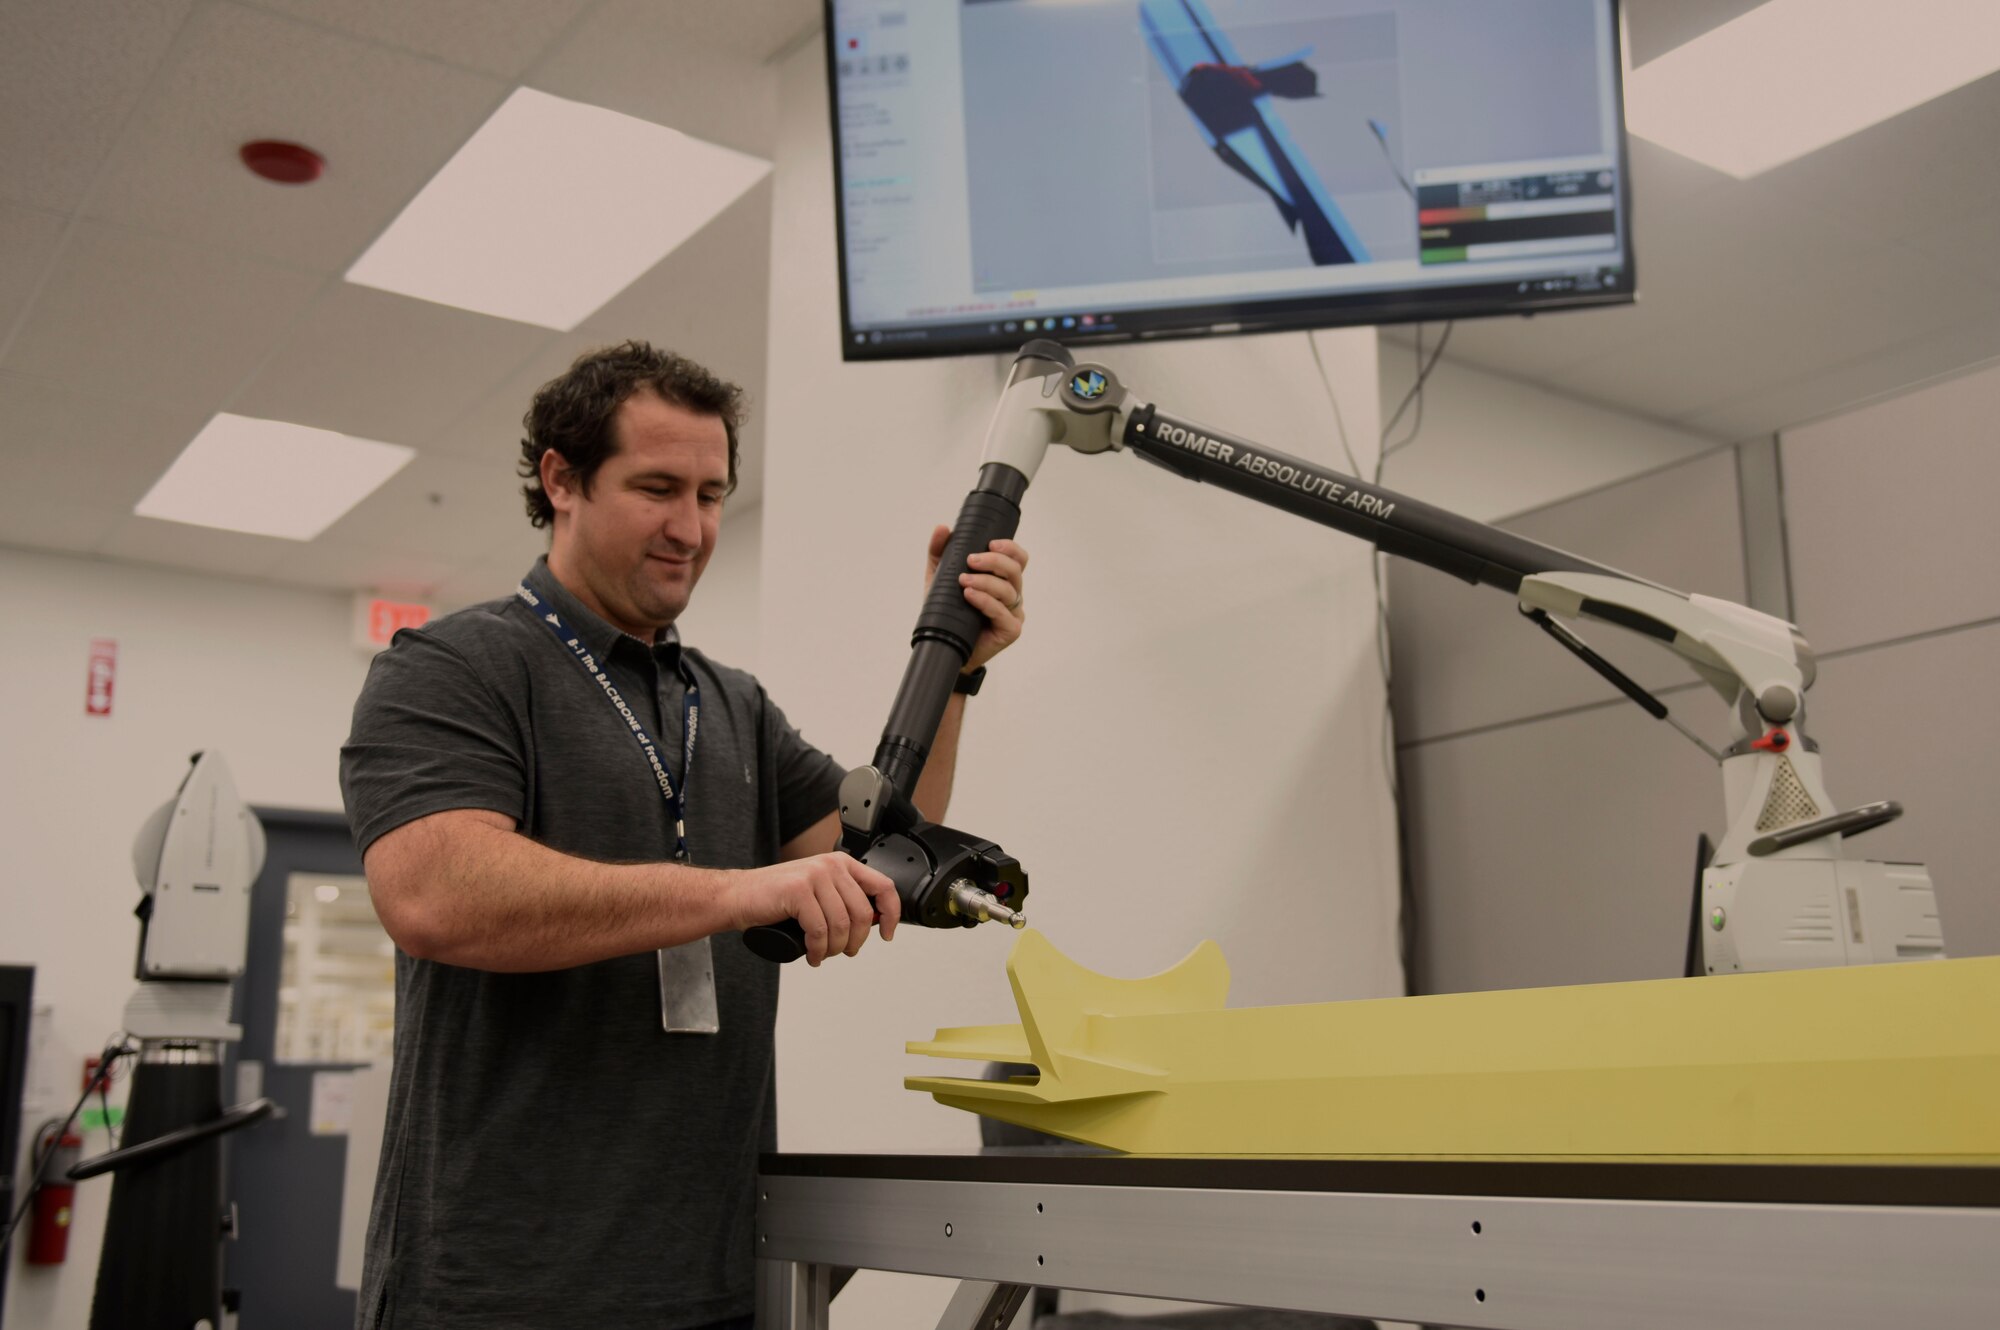 Kyle Taylor, 76th Commodities Maintenance Group engineer, demonstrates material scanning during a tour of the Reverse Engineering and Critical Tooling at Tinker Air Force Base, Oklahoma, Nov. 20, 2018. Tinker's largest organization is the Oklahoma City Air Logistics Complex. It is the largest of three depot repair complexes in Air Force Material Command and provides depot maintenance on the KC-135 Stratotanker, B-1 Lancer, B-52 Stratofortress, E-3 Sentry and E-6 Mercury aircraft. (U.S. Air Force photo byAirman 1st Class Jesenia Landaverde)